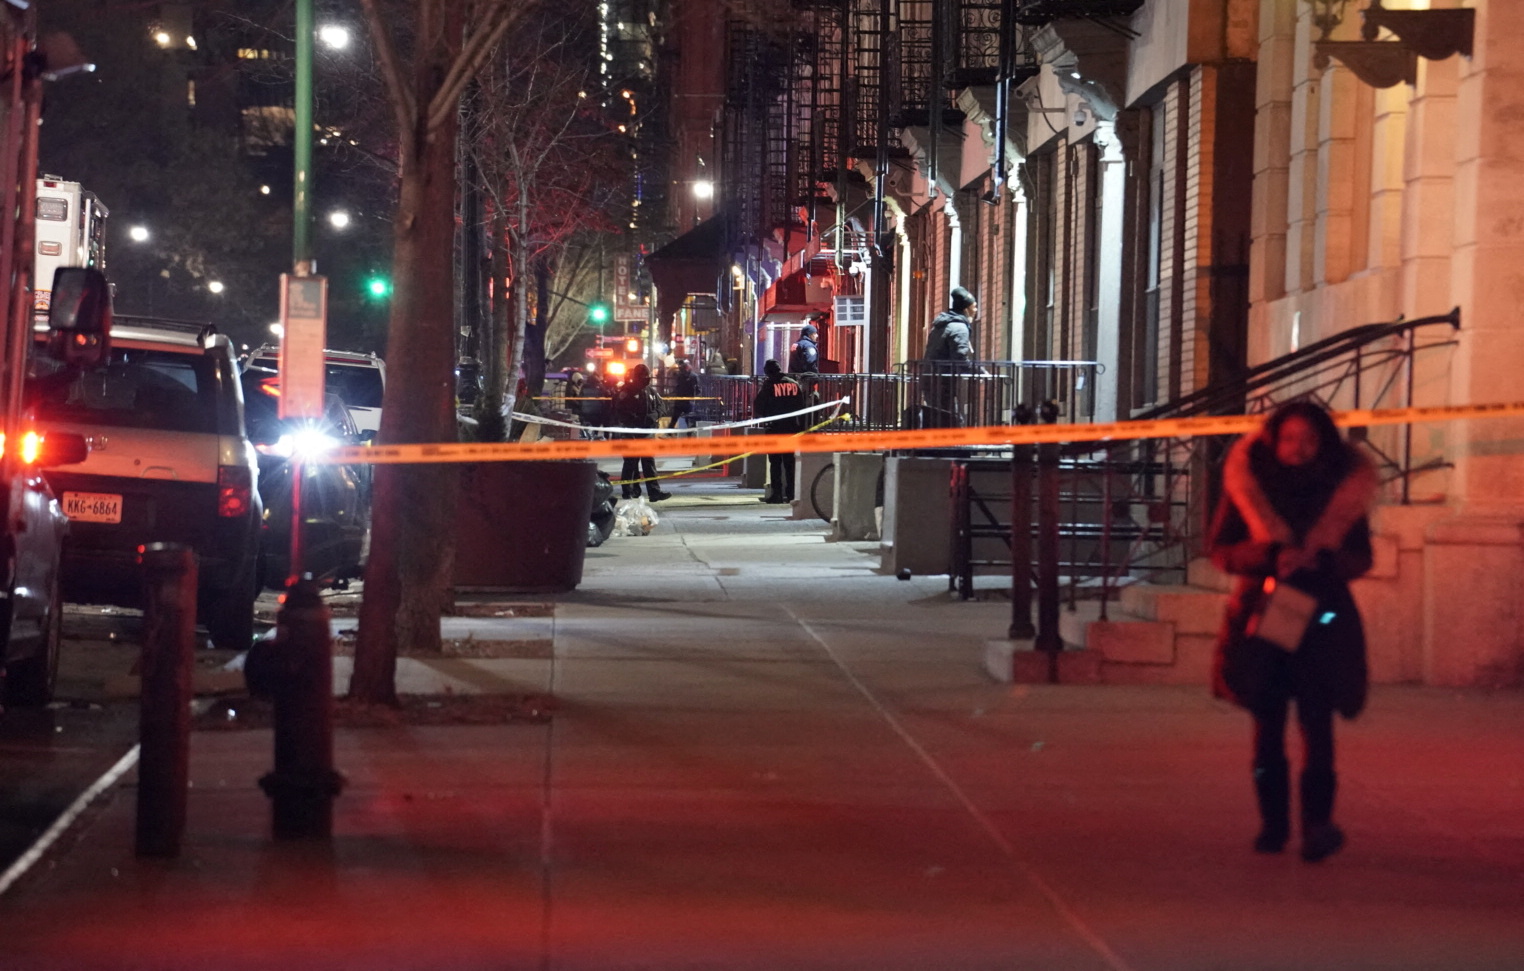 Emergency personnel respond at the scene where NYPD officers were shot while responding to a domestic violence call